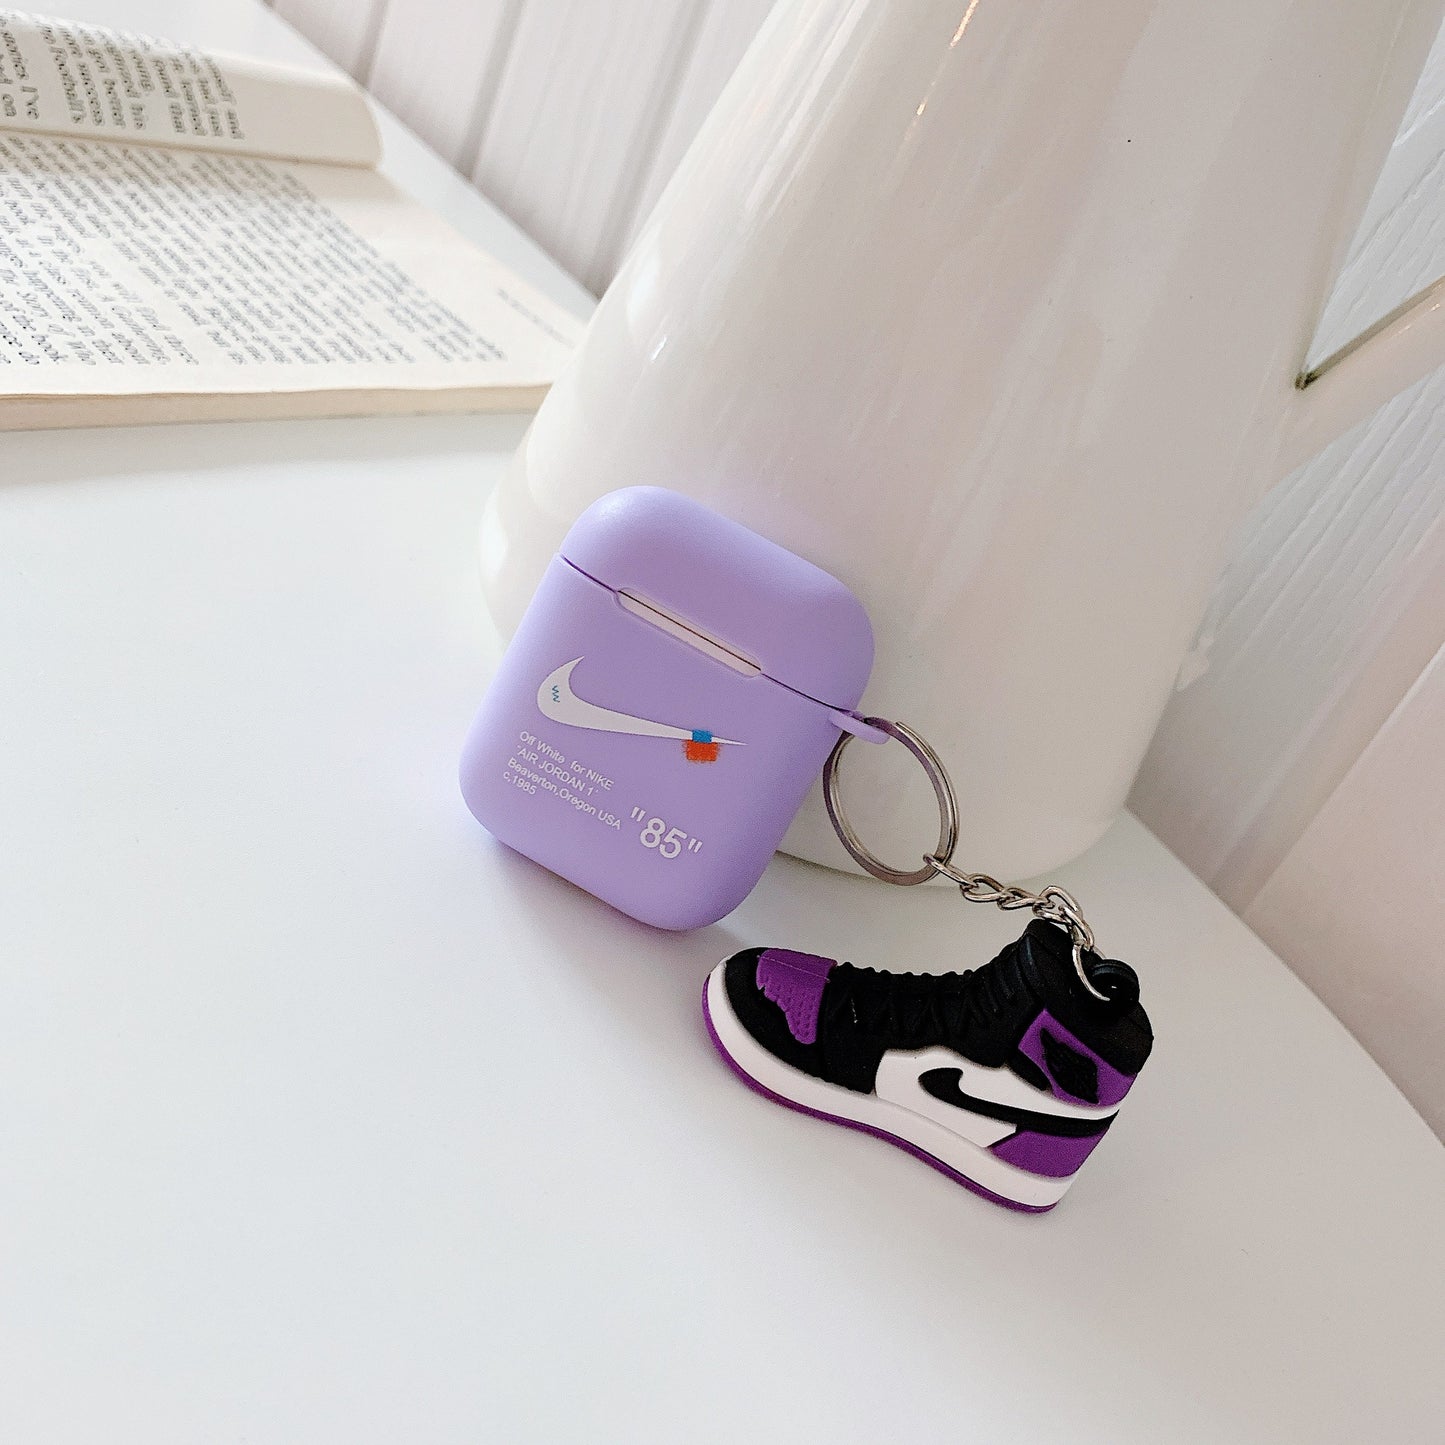 INSINC Creative Candy Color TPU Soft Shell AirPods-Hülle